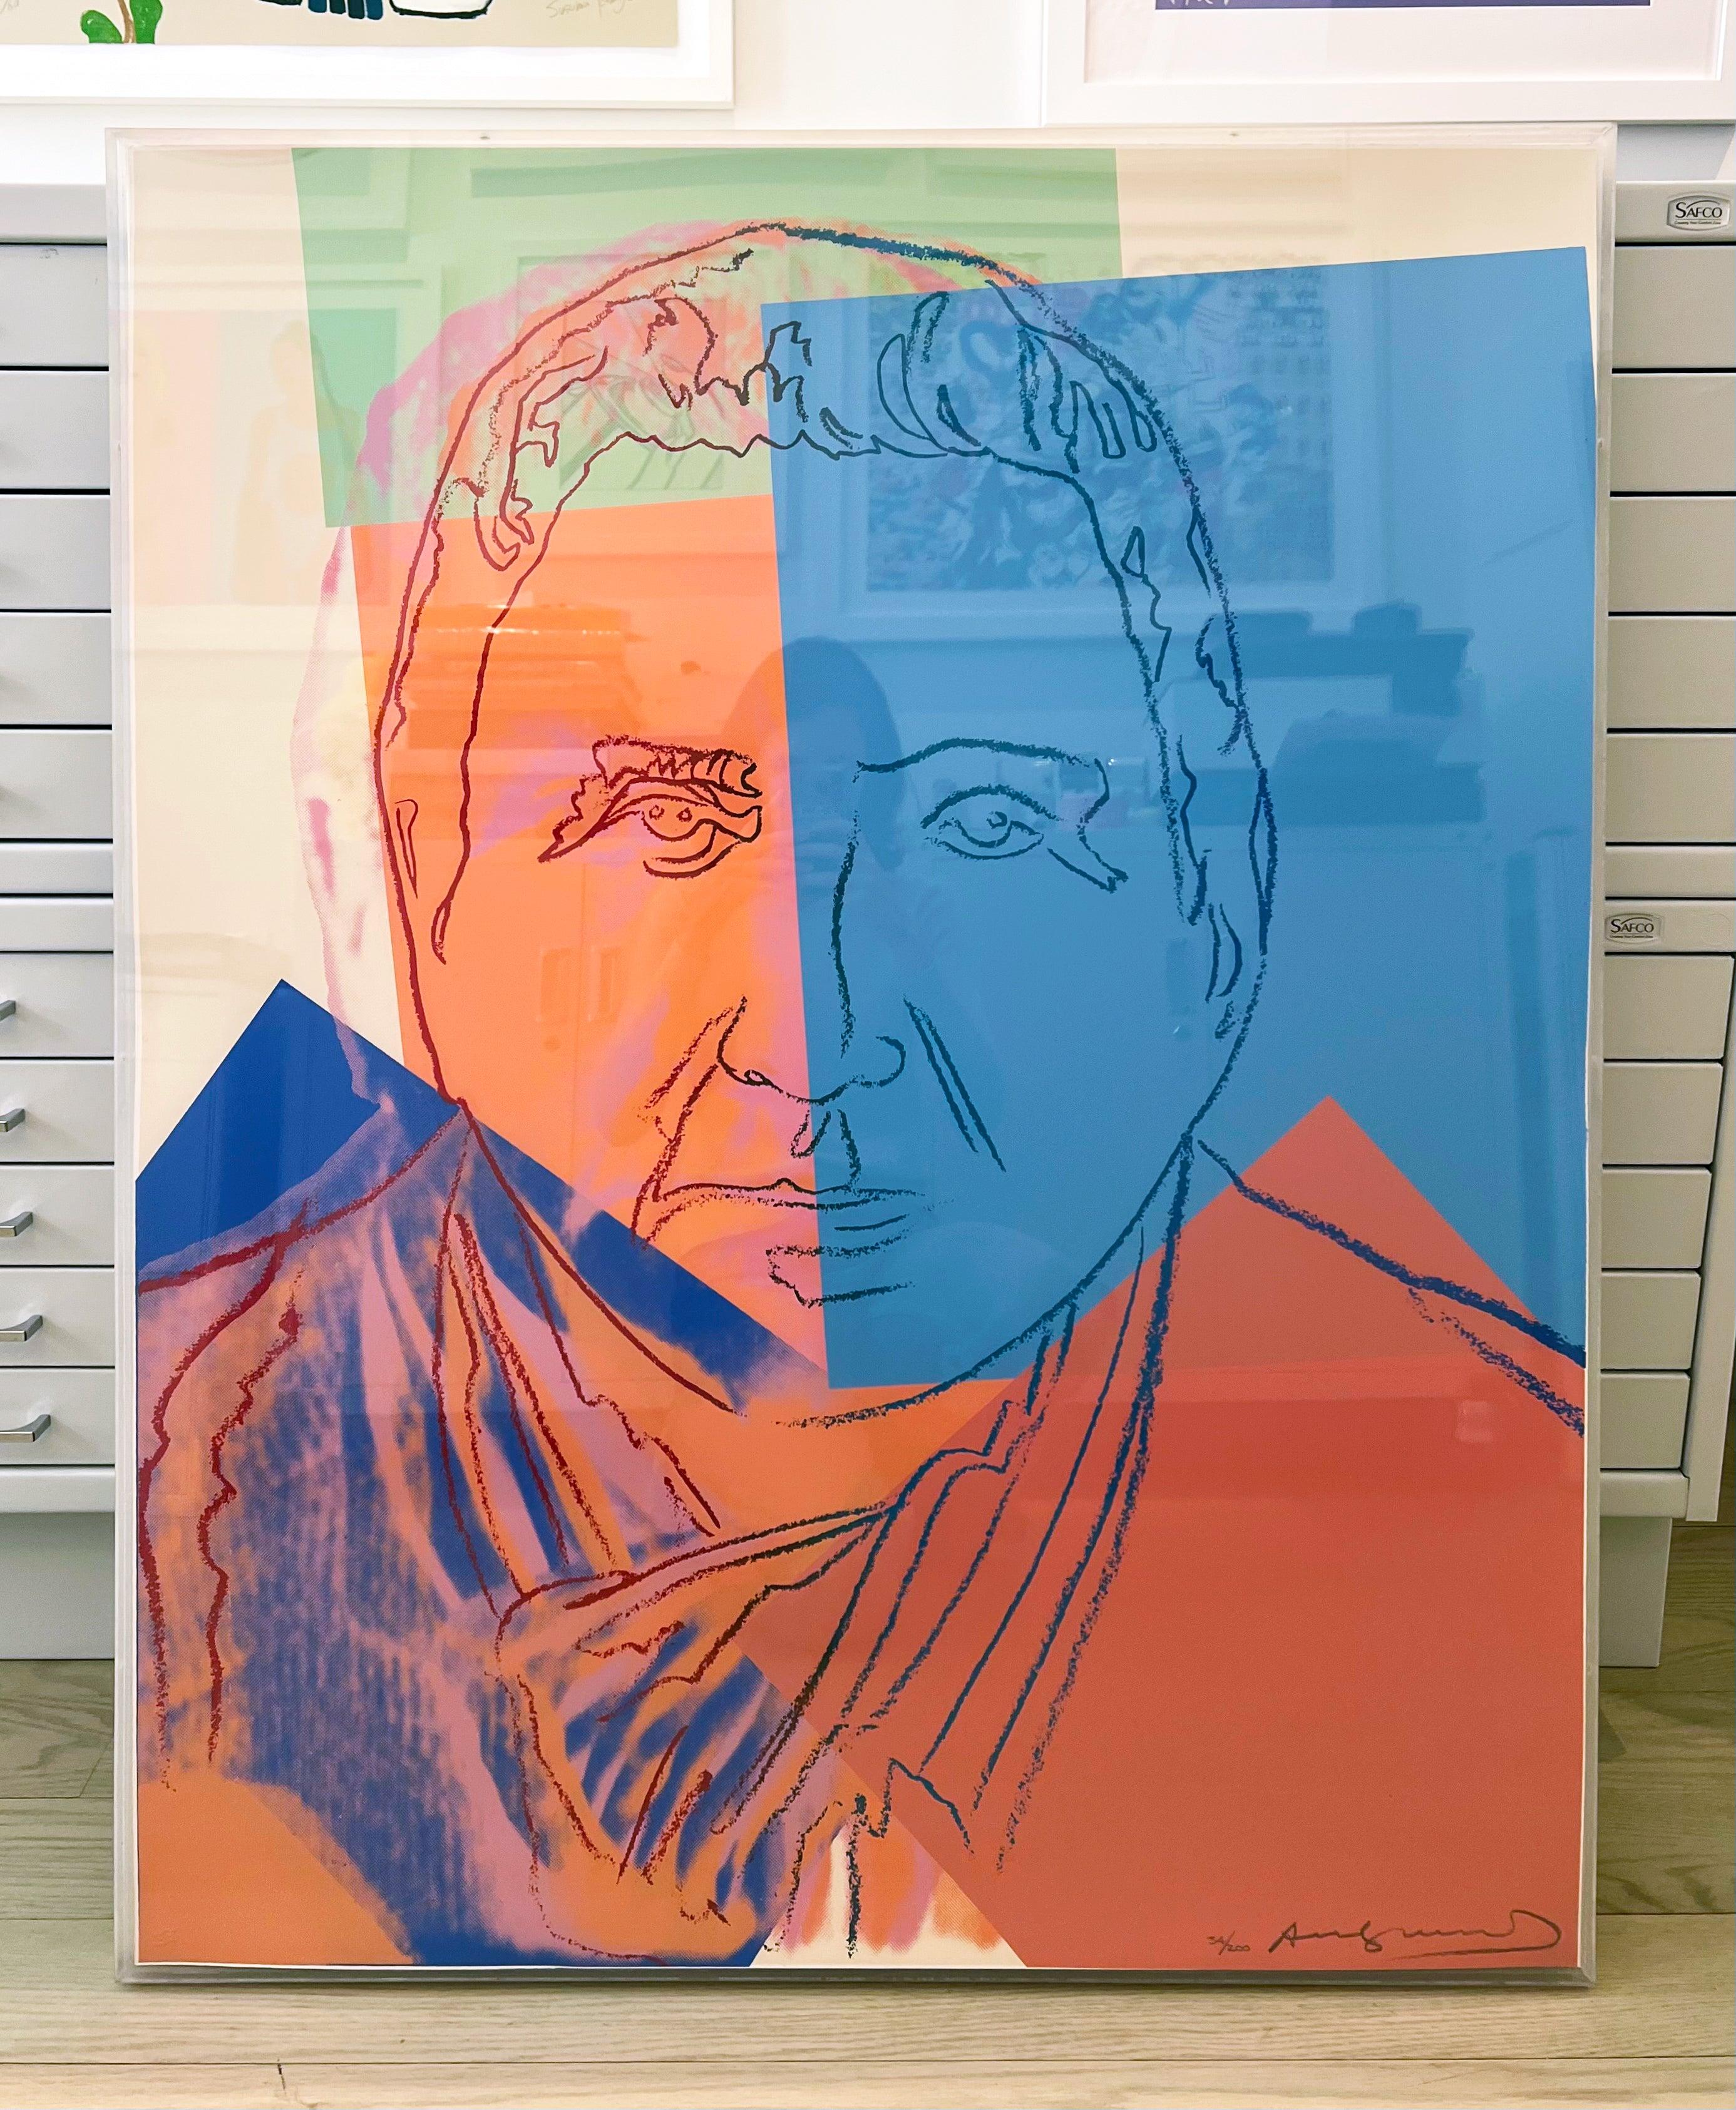 Gertrude Stein, from Ten Portraits of Jews of the Twentieth Century - Print by Andy Warhol